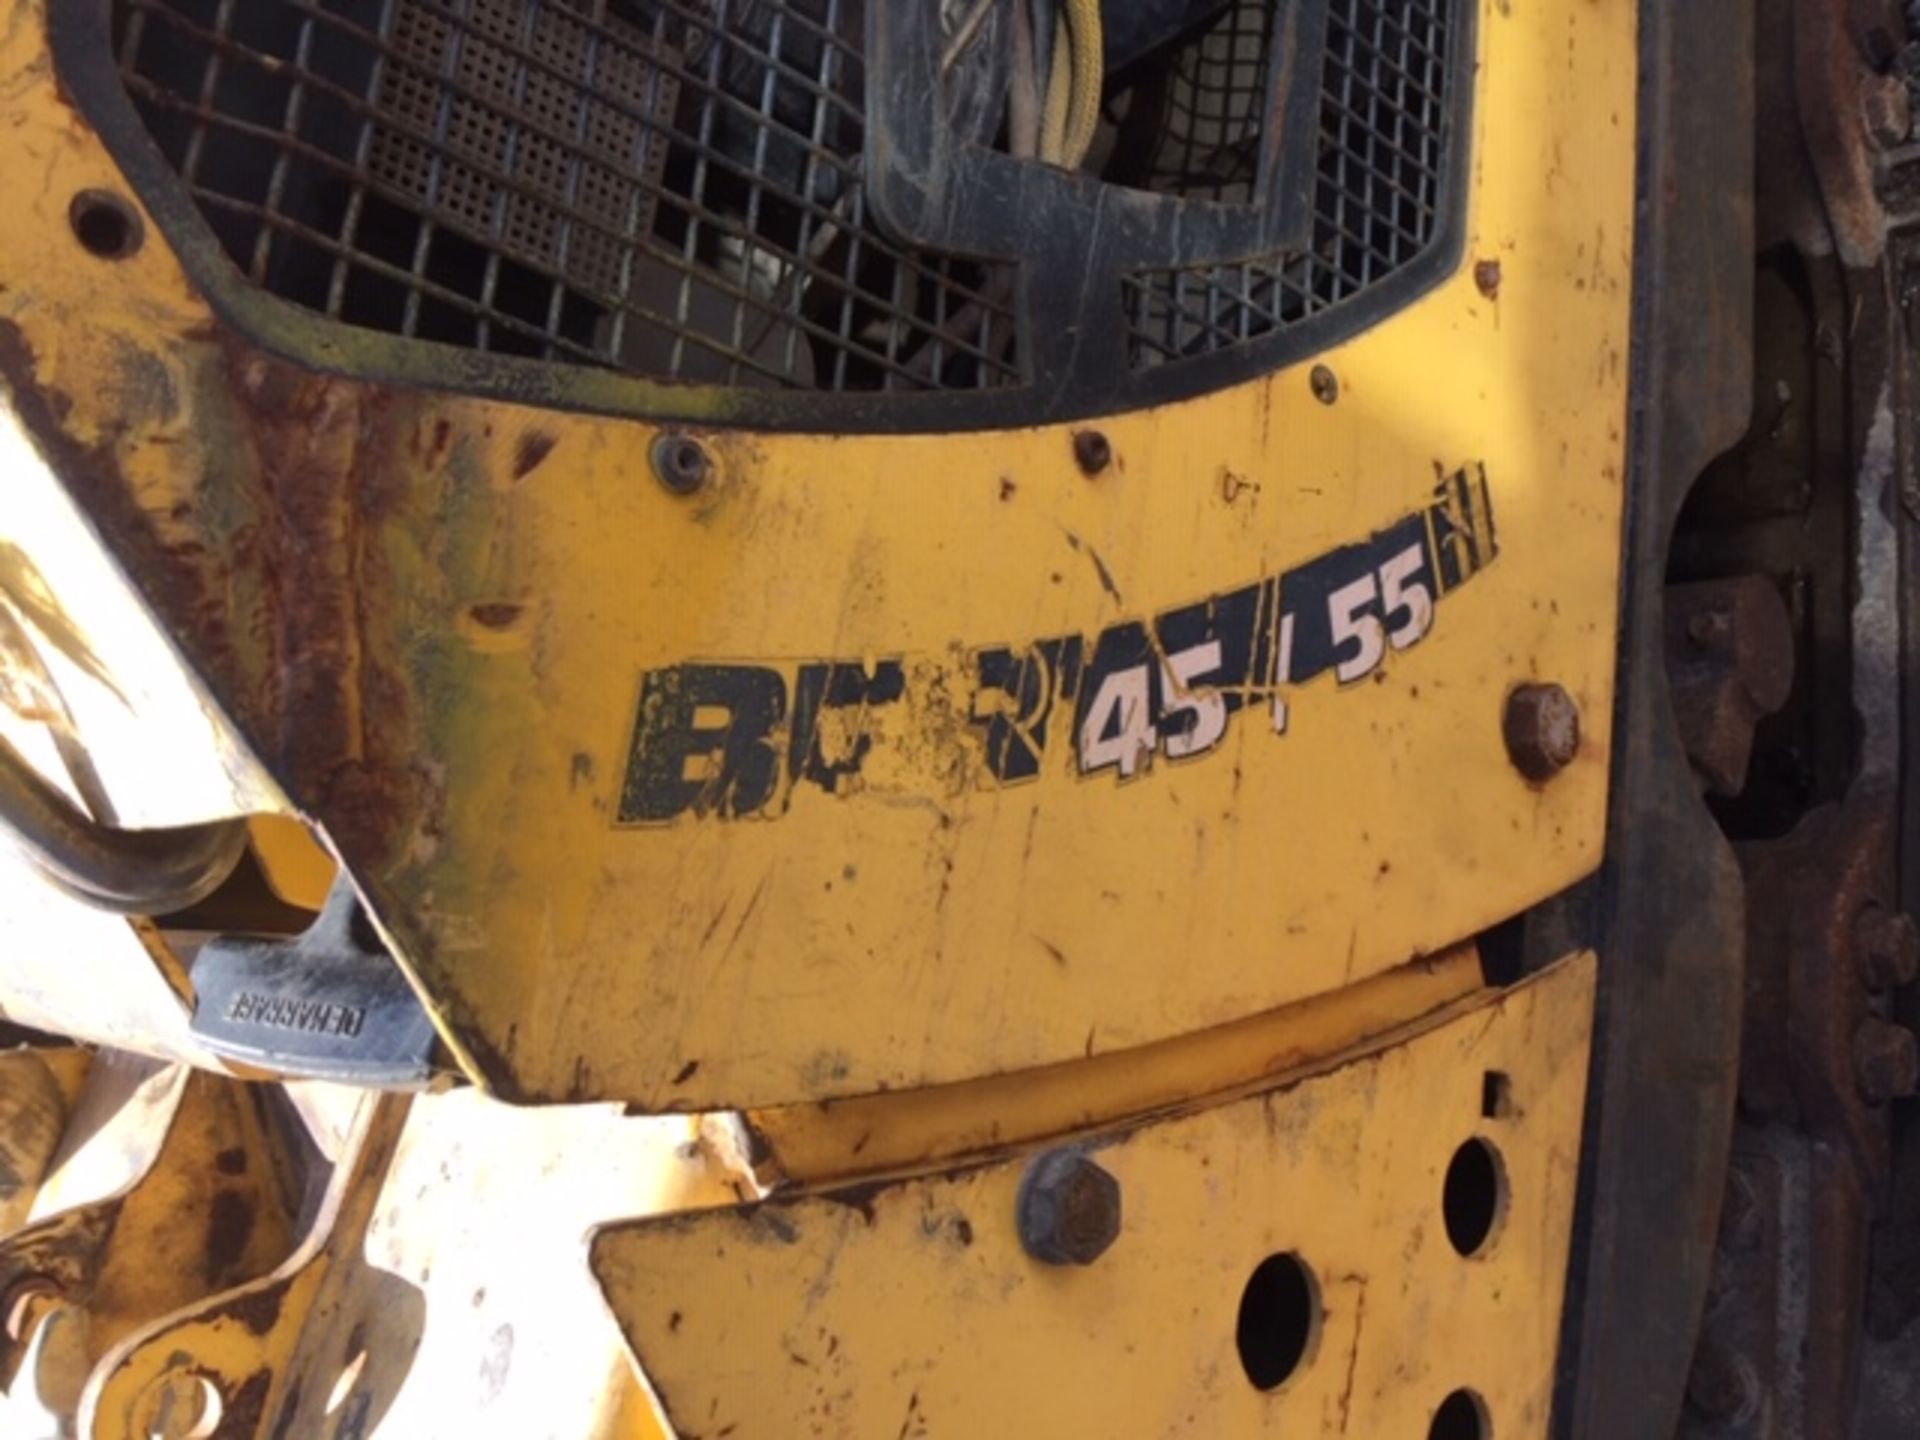 BOMAG Reversible Compactor,mod: BPR 45-55, 2005 (see photos for details) - Image 4 of 8